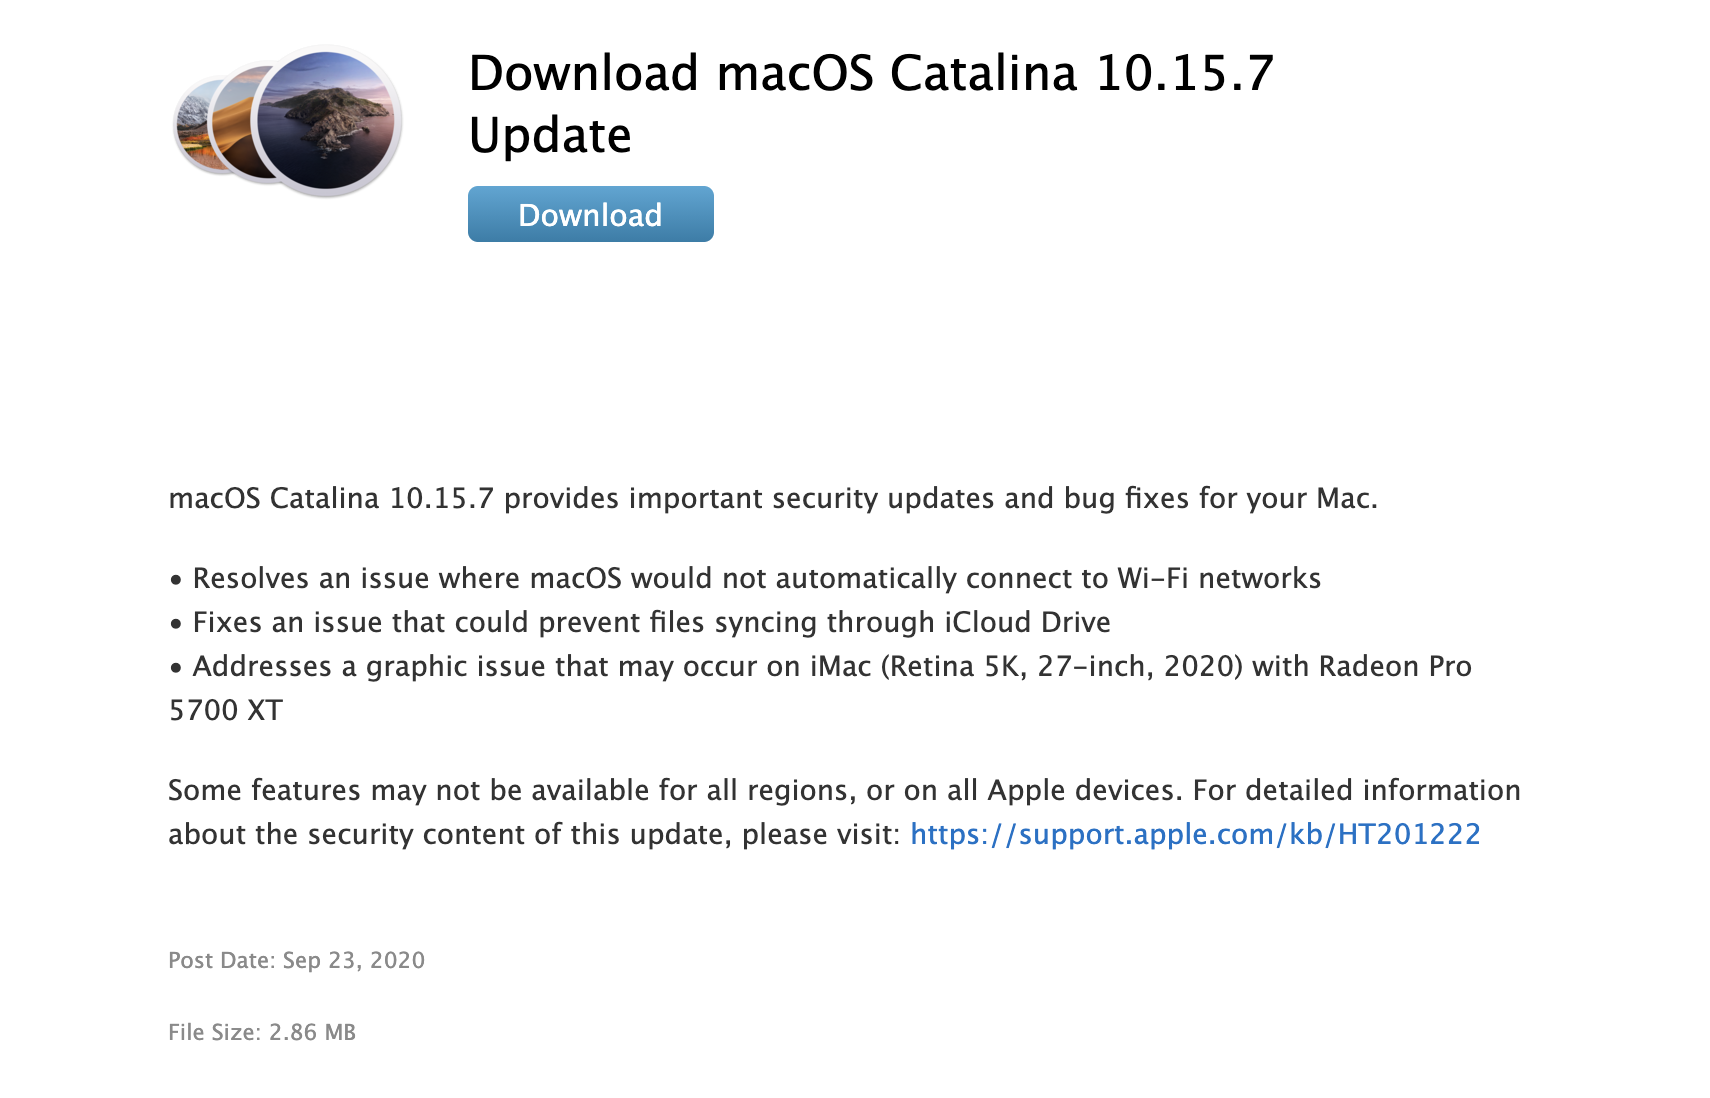 macOS Catalina 10.15.7 Update - File Size: 2.86 MB